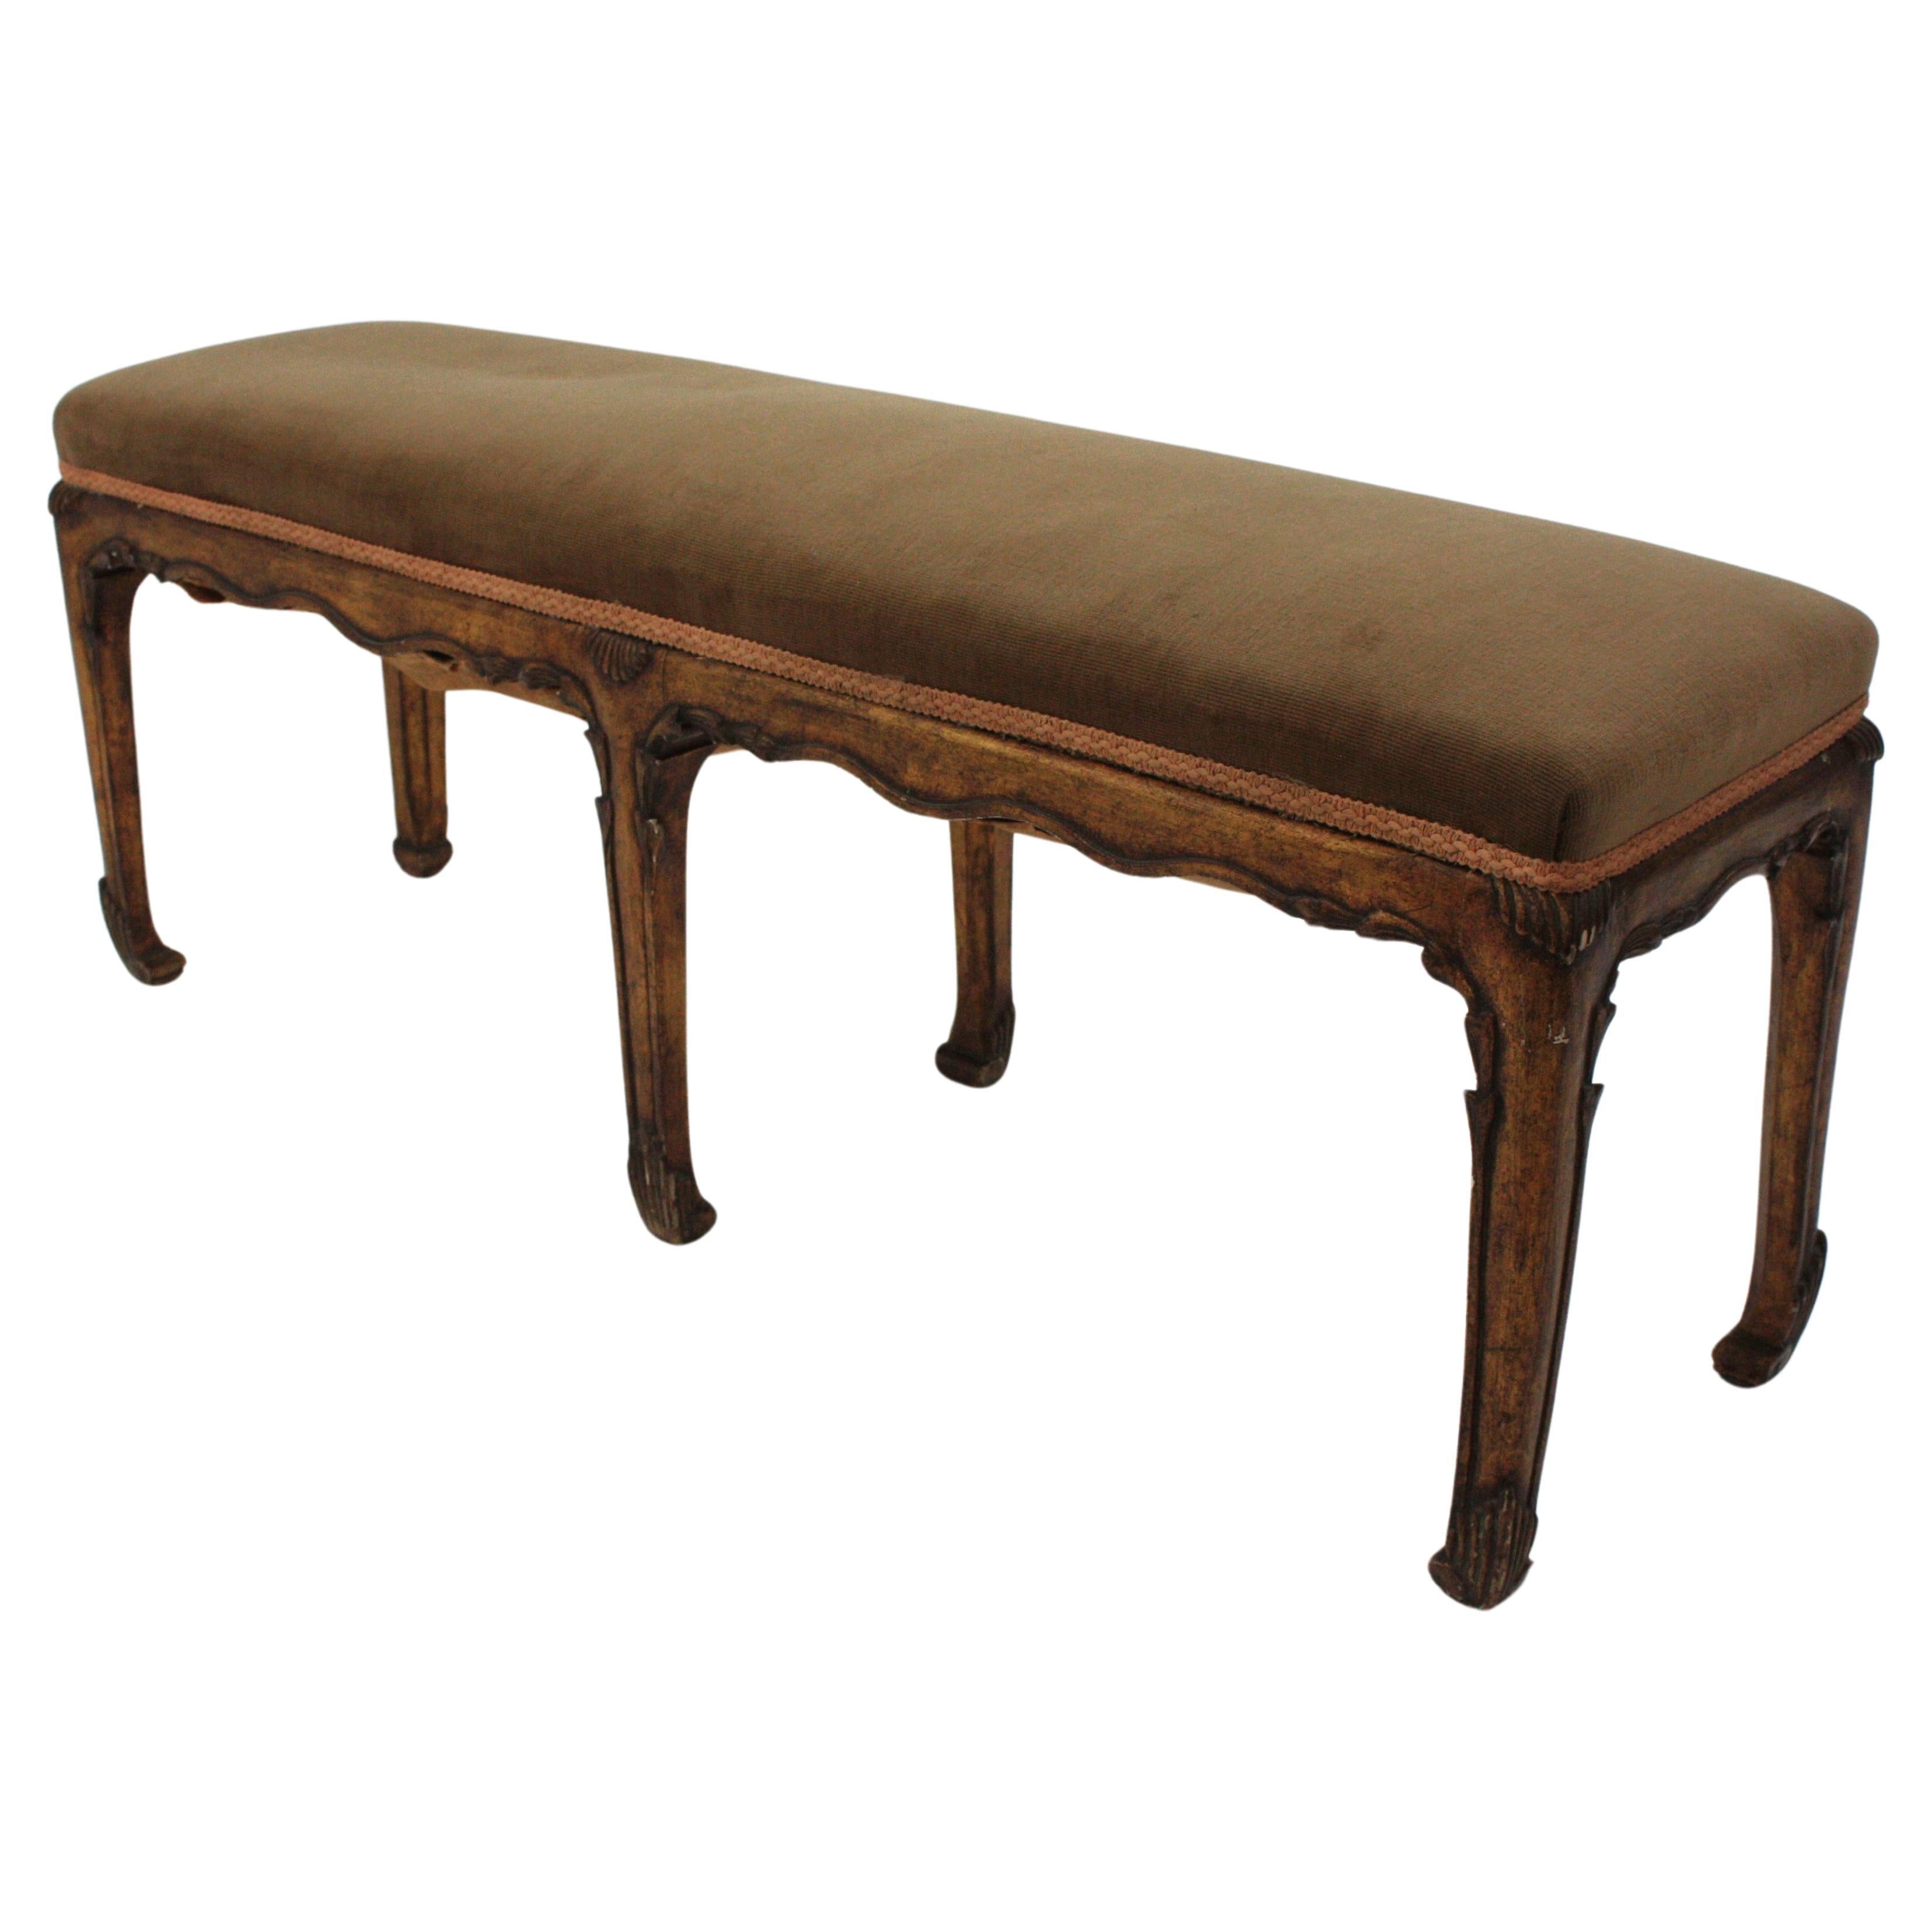 French Long Bench / Long Ottoman / Stool in Carved Giltwood, France, 1930s
Chinoiserie style upholstered bench in giltwood with carving details.
This bench or stool is raised on six legs with carved chinoiserie art deco motifs and gold leaf gilding.